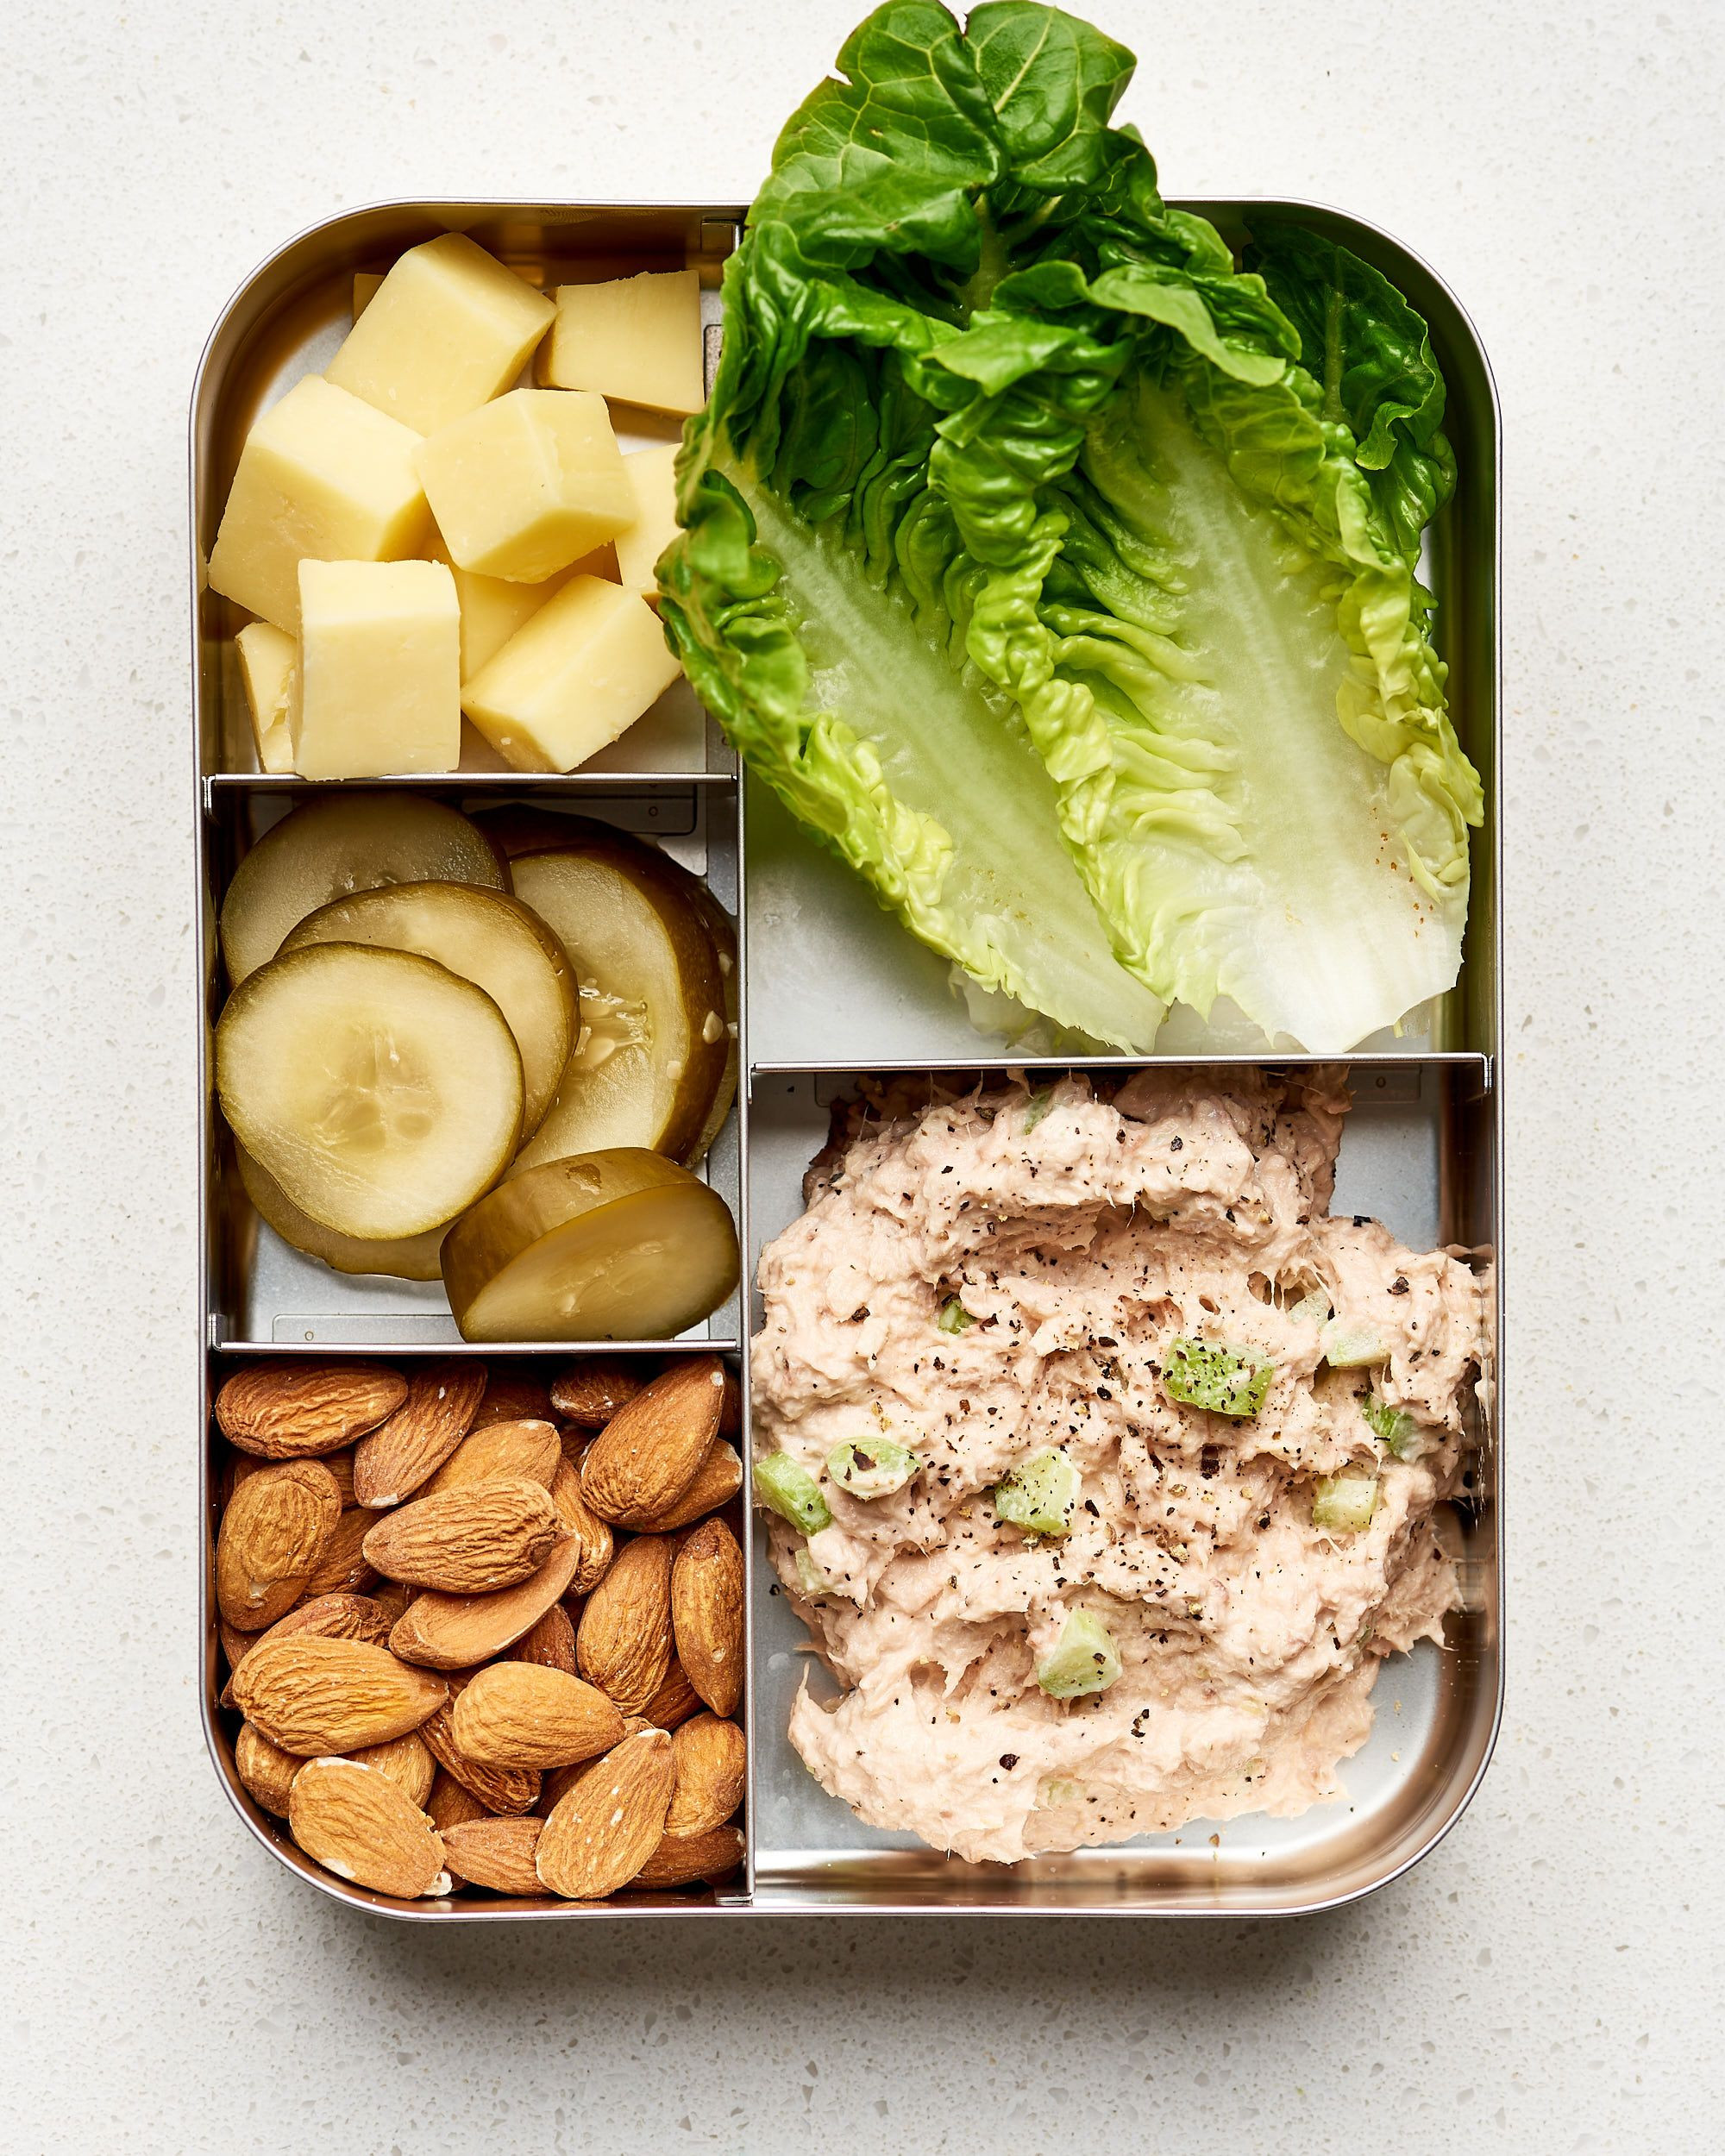 Clean Keto Lunches For Work
 10 Easy Ways to Pack a Keto Friendly Lunch